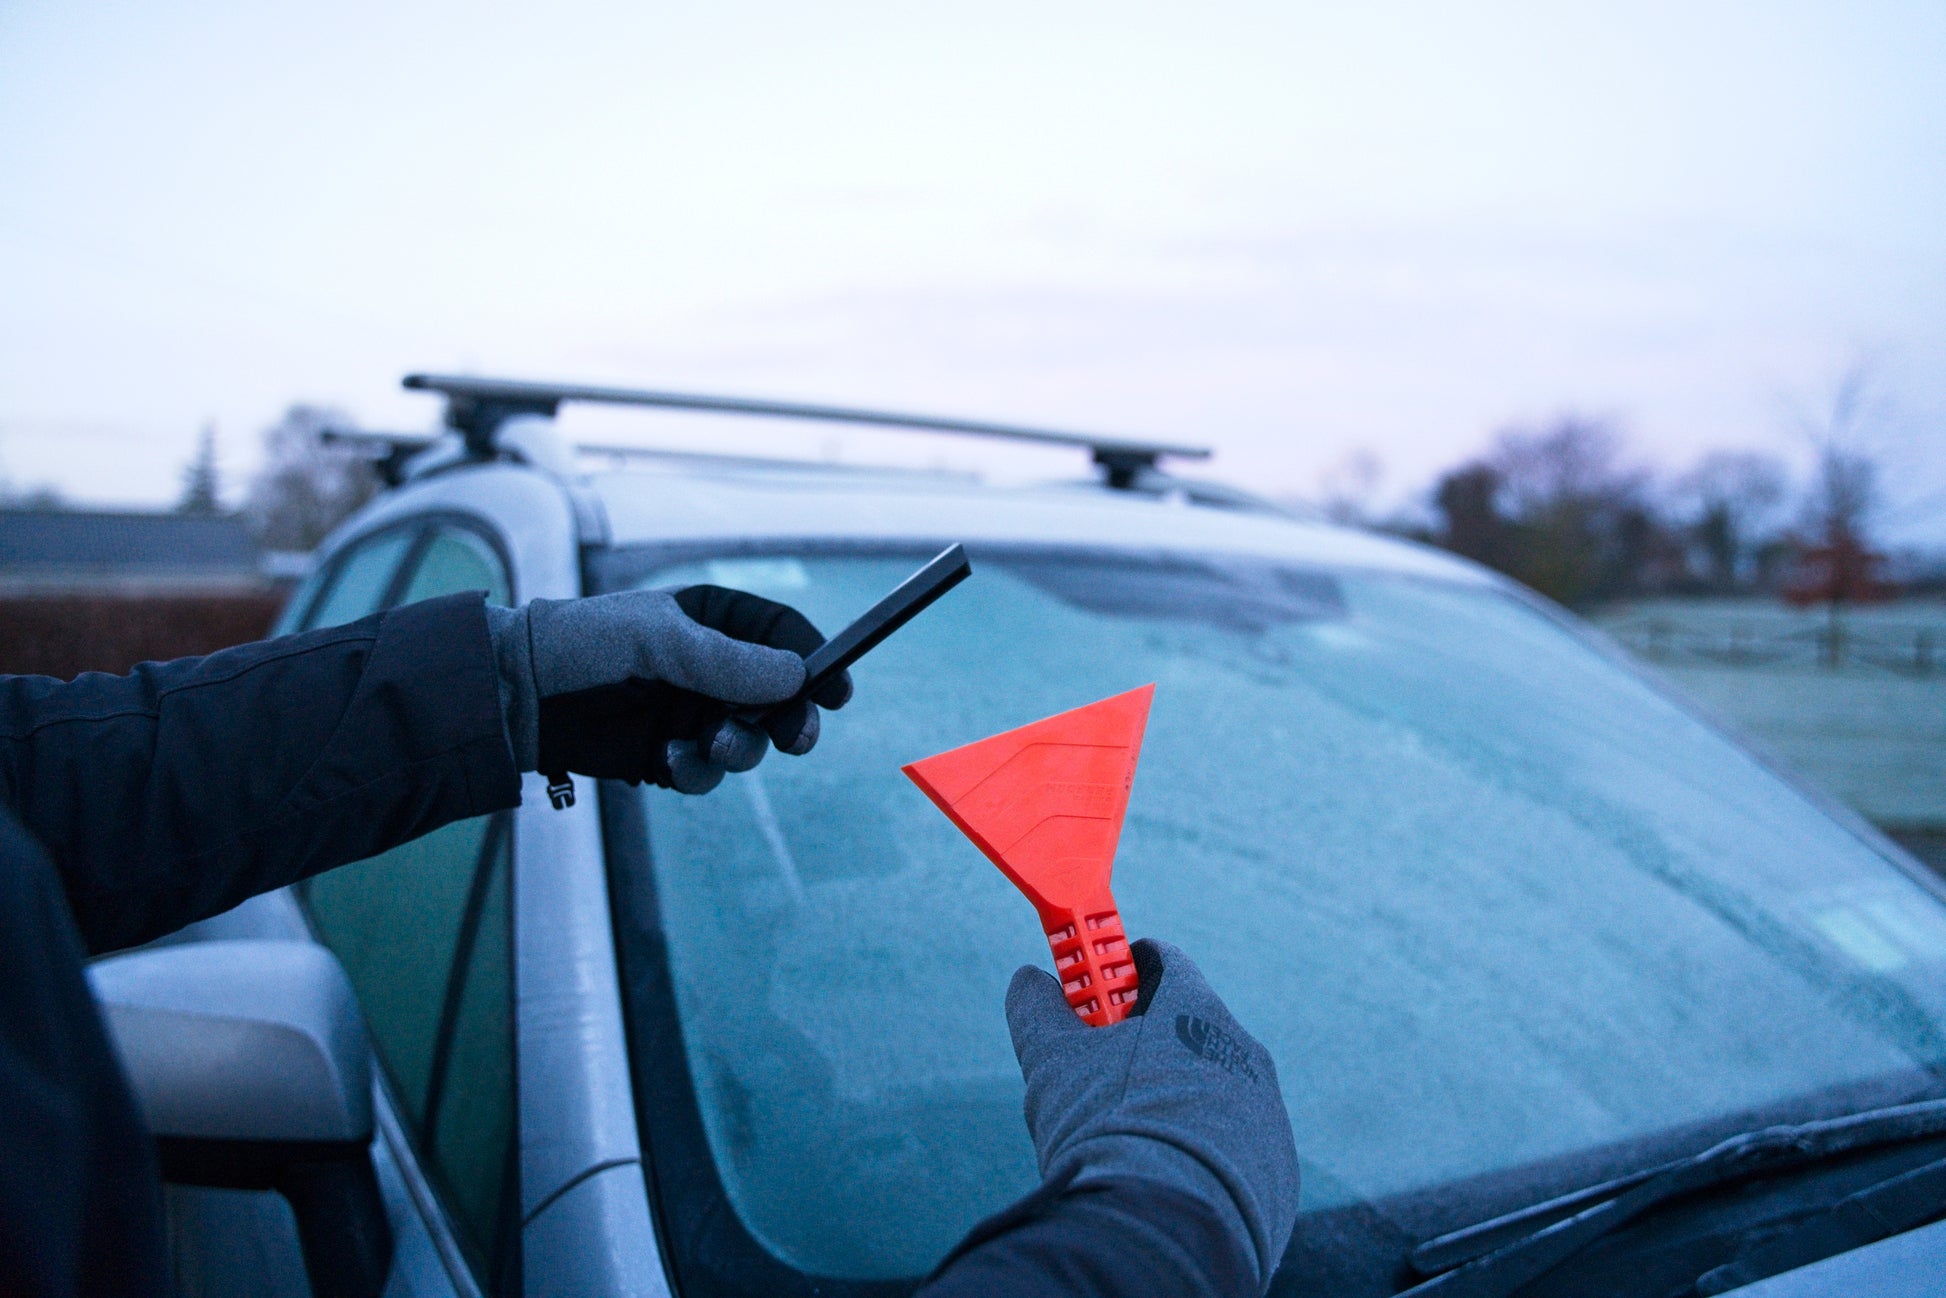 Stayhold ICE SCRAPER+SQUEEGEE removing squeegee